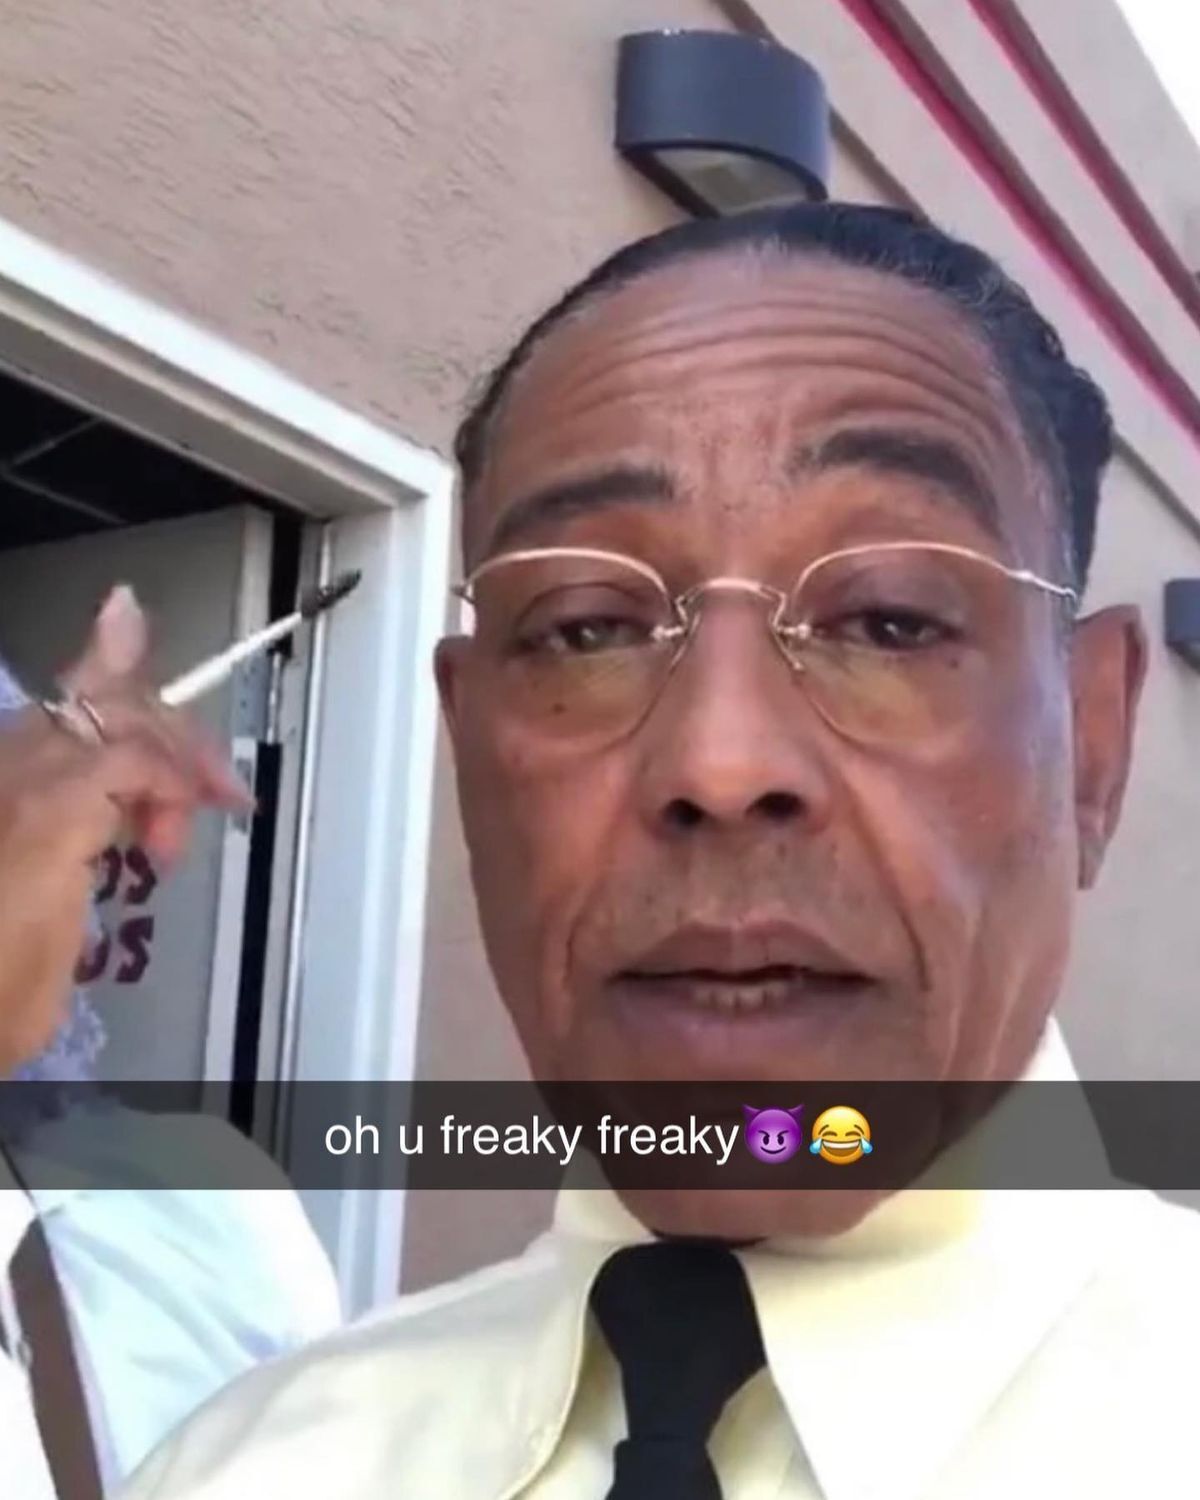 Gus Fring taking a fake snapchat that says, oh u freaky freaky